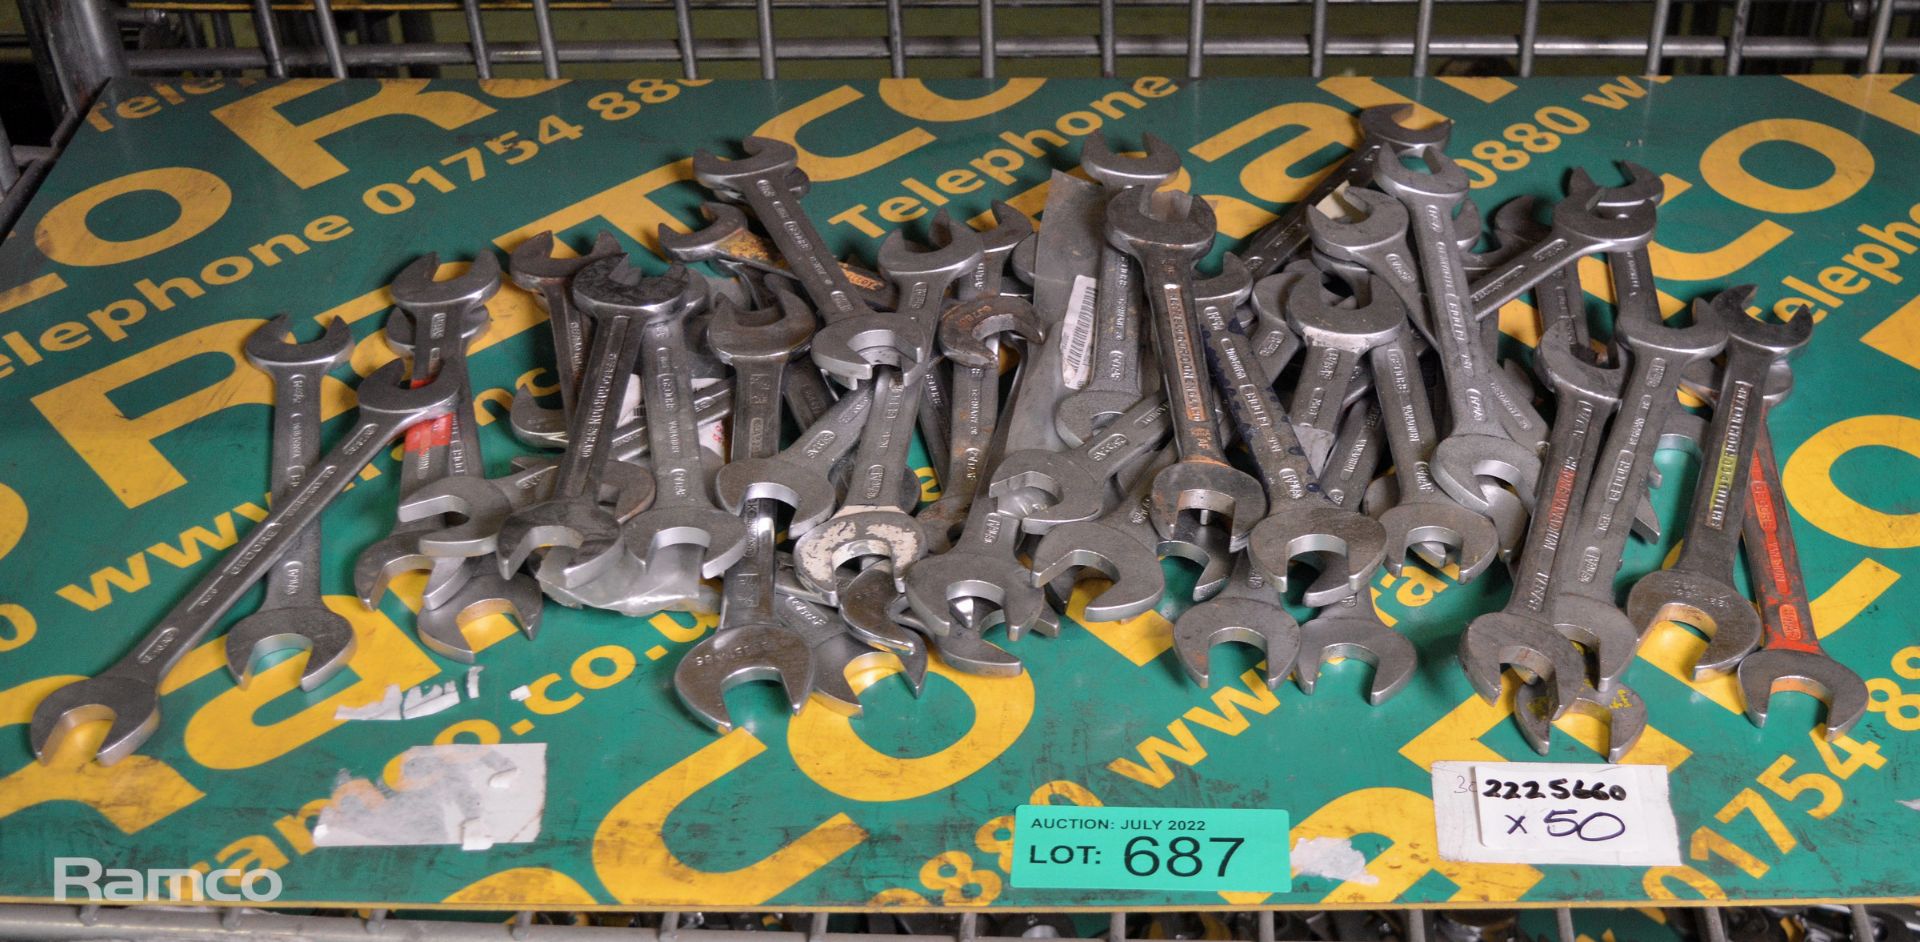 50x Open Ended Spanners - various sizes as per pictures